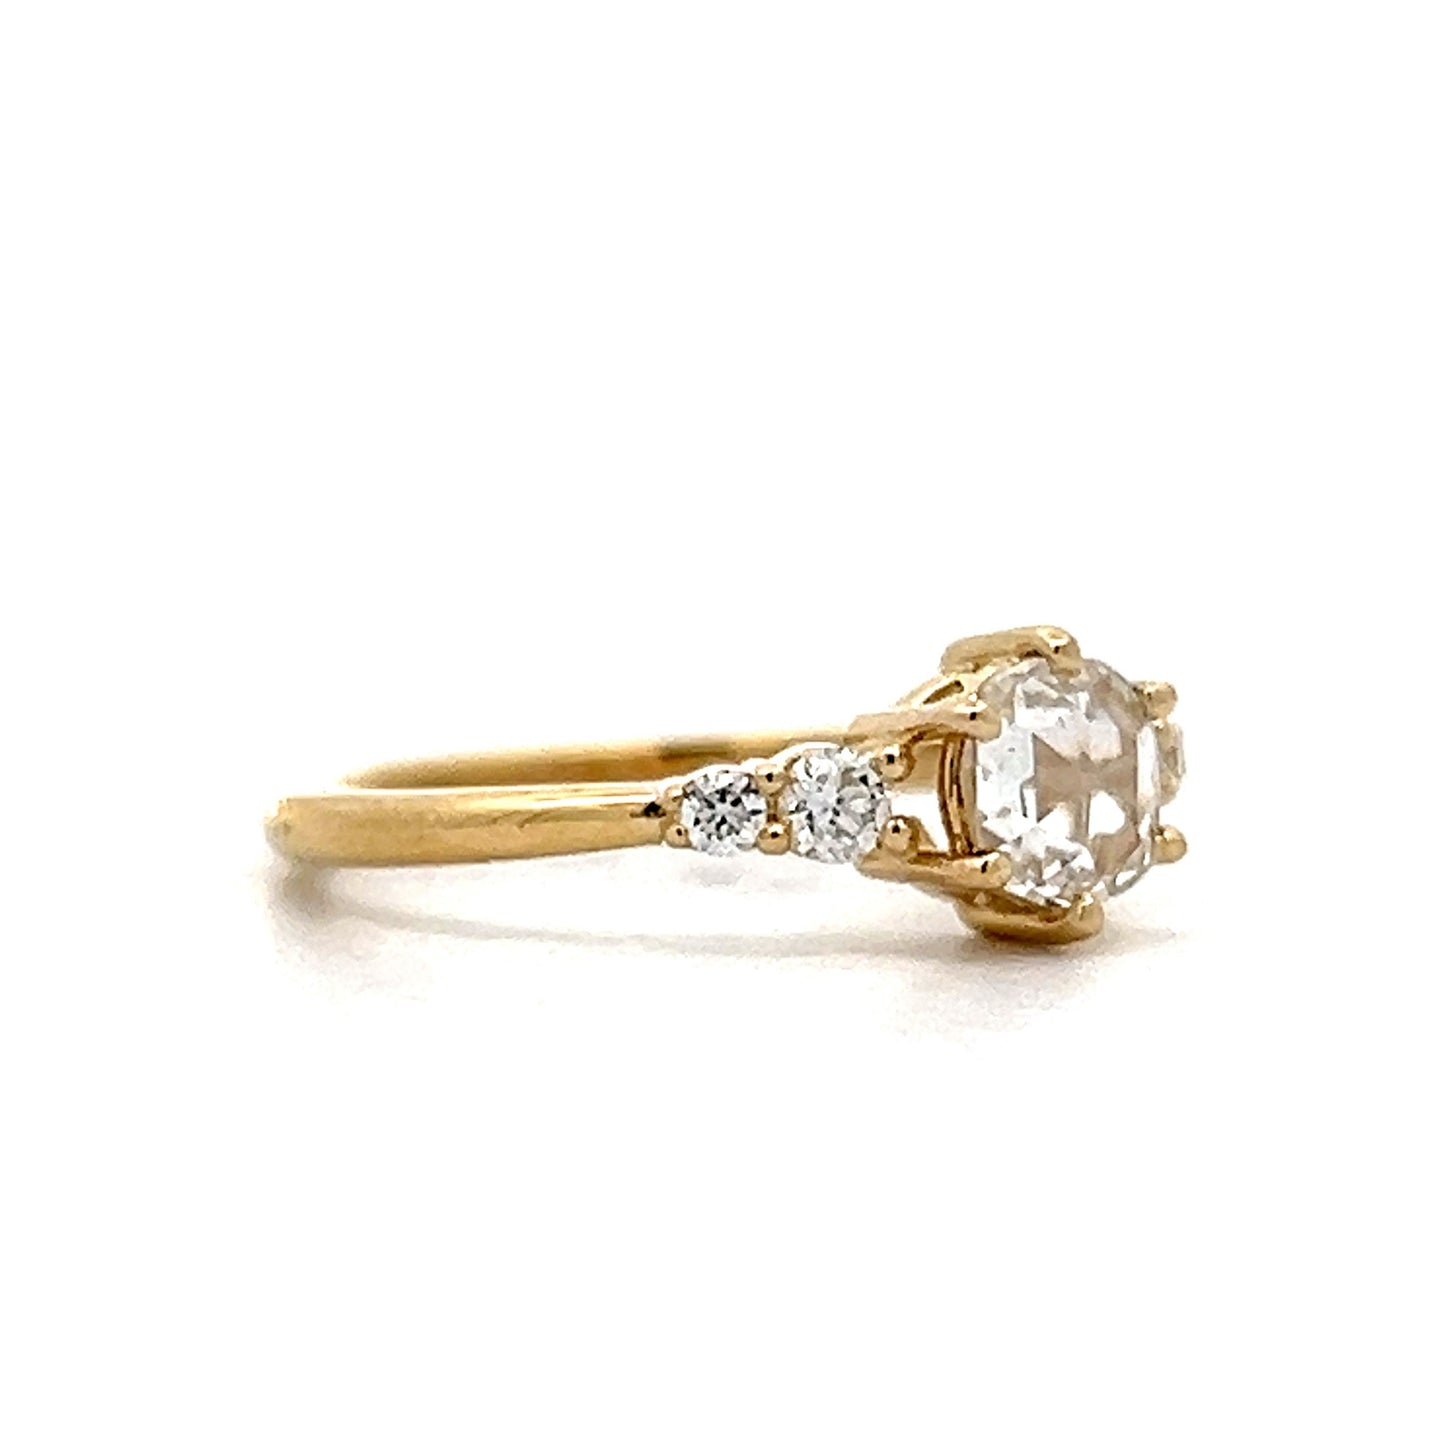 .82 Rose Cut Diamond Engagement Ring in Yellow Gold